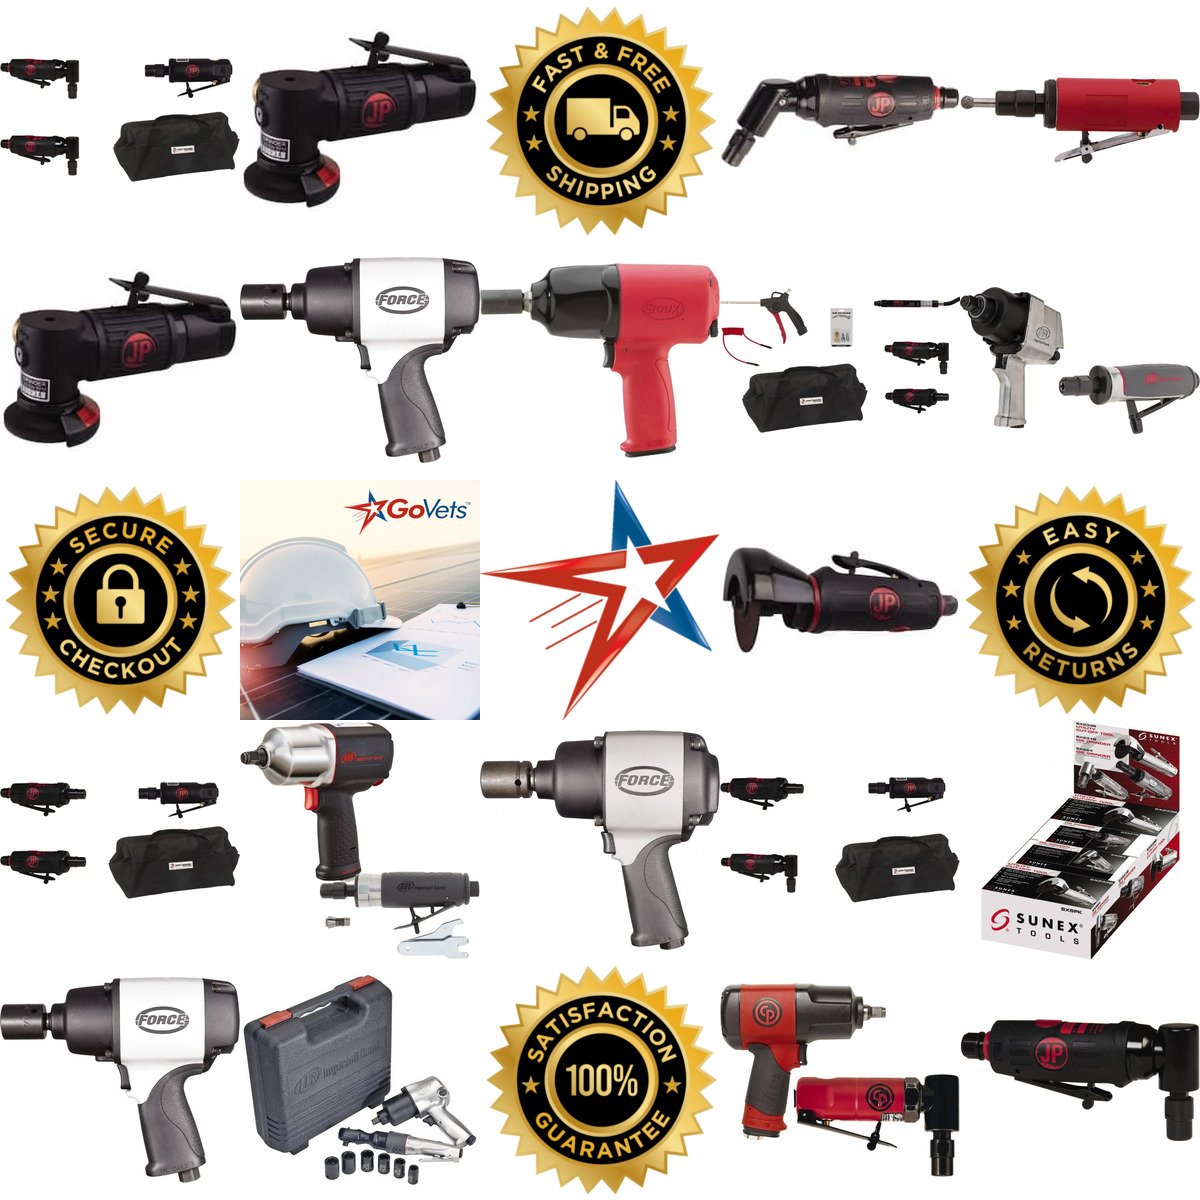 A selection of Air Tool Combination Kits products on GoVets